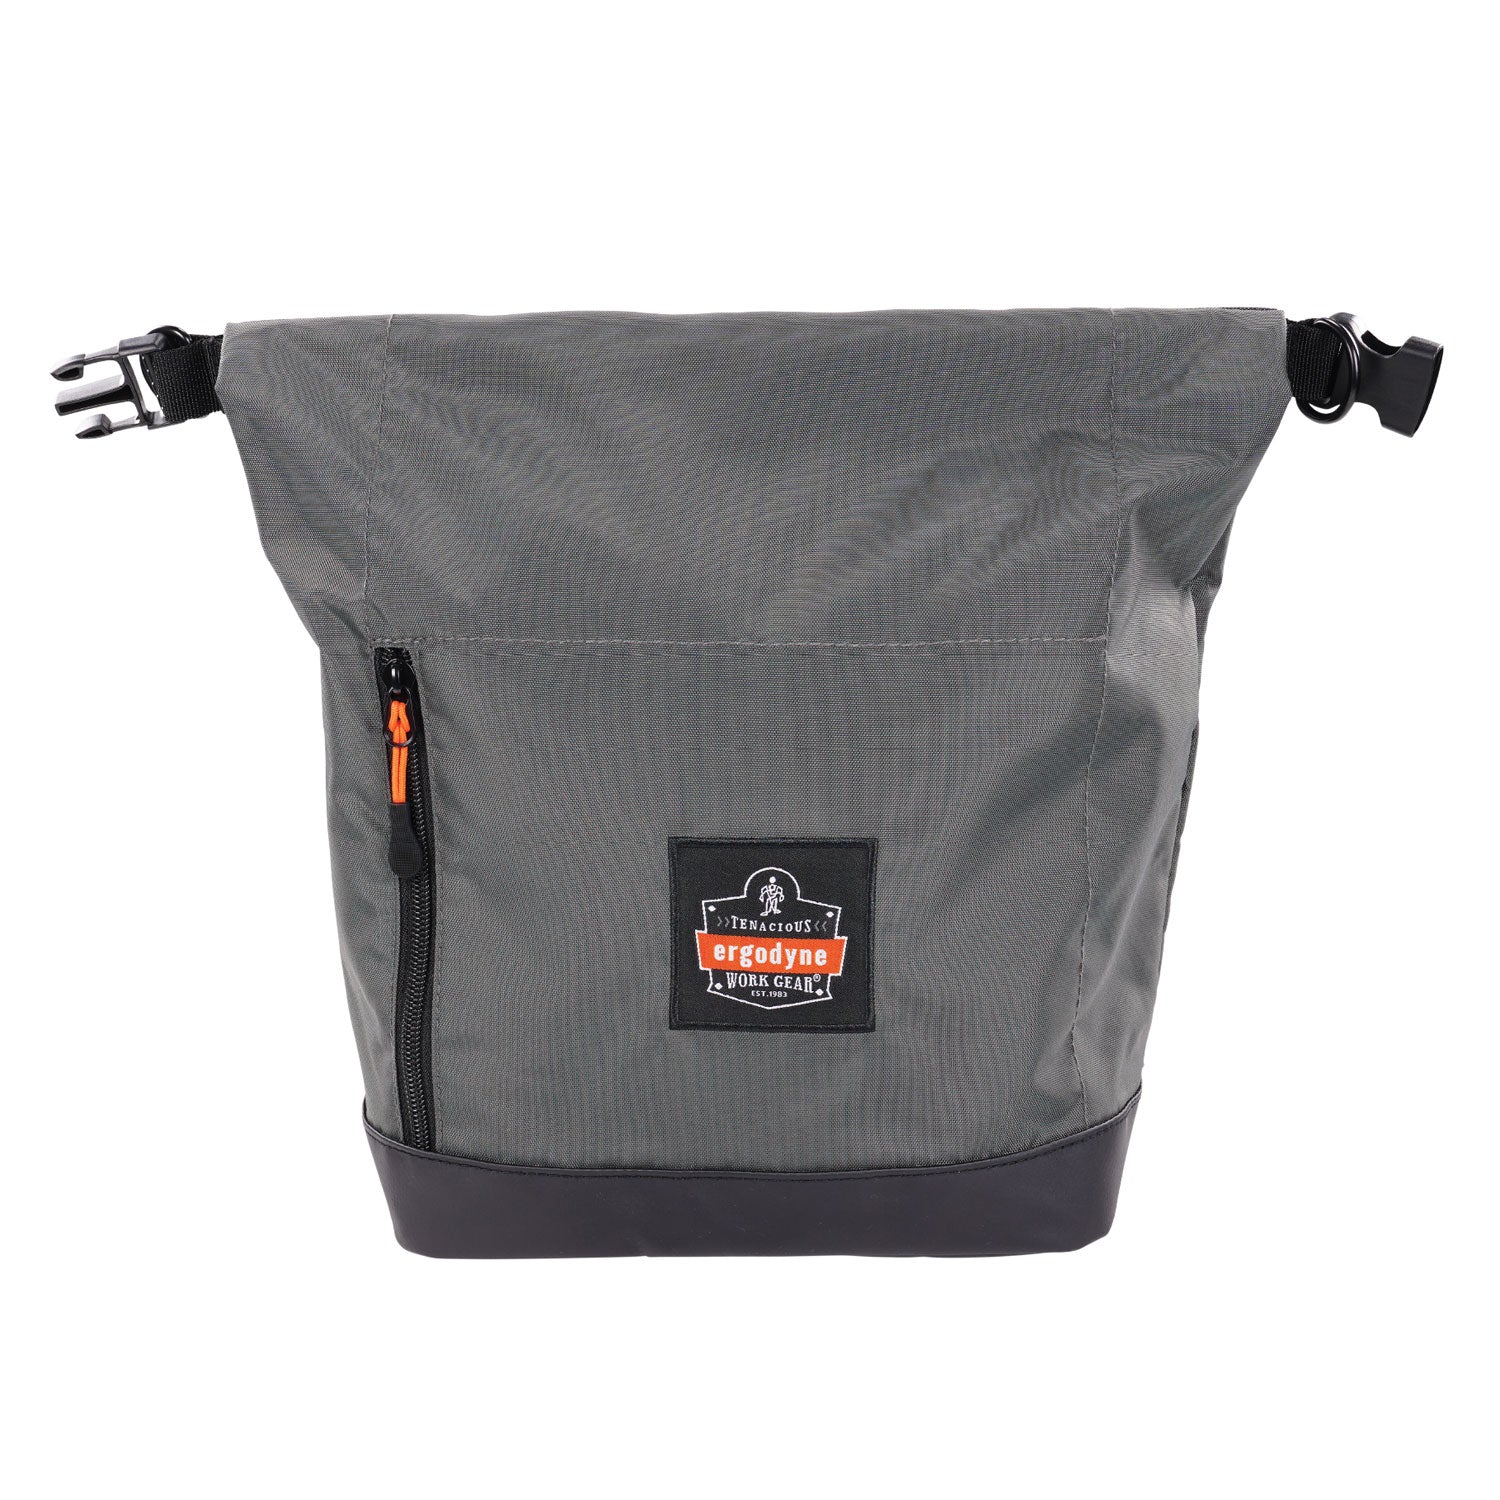 arsenal-5186-full-respirator-bag-with-roll-top-closure-75-x-135-x-135-gray-ships-in-1-3-business-days_ego13186 - 1